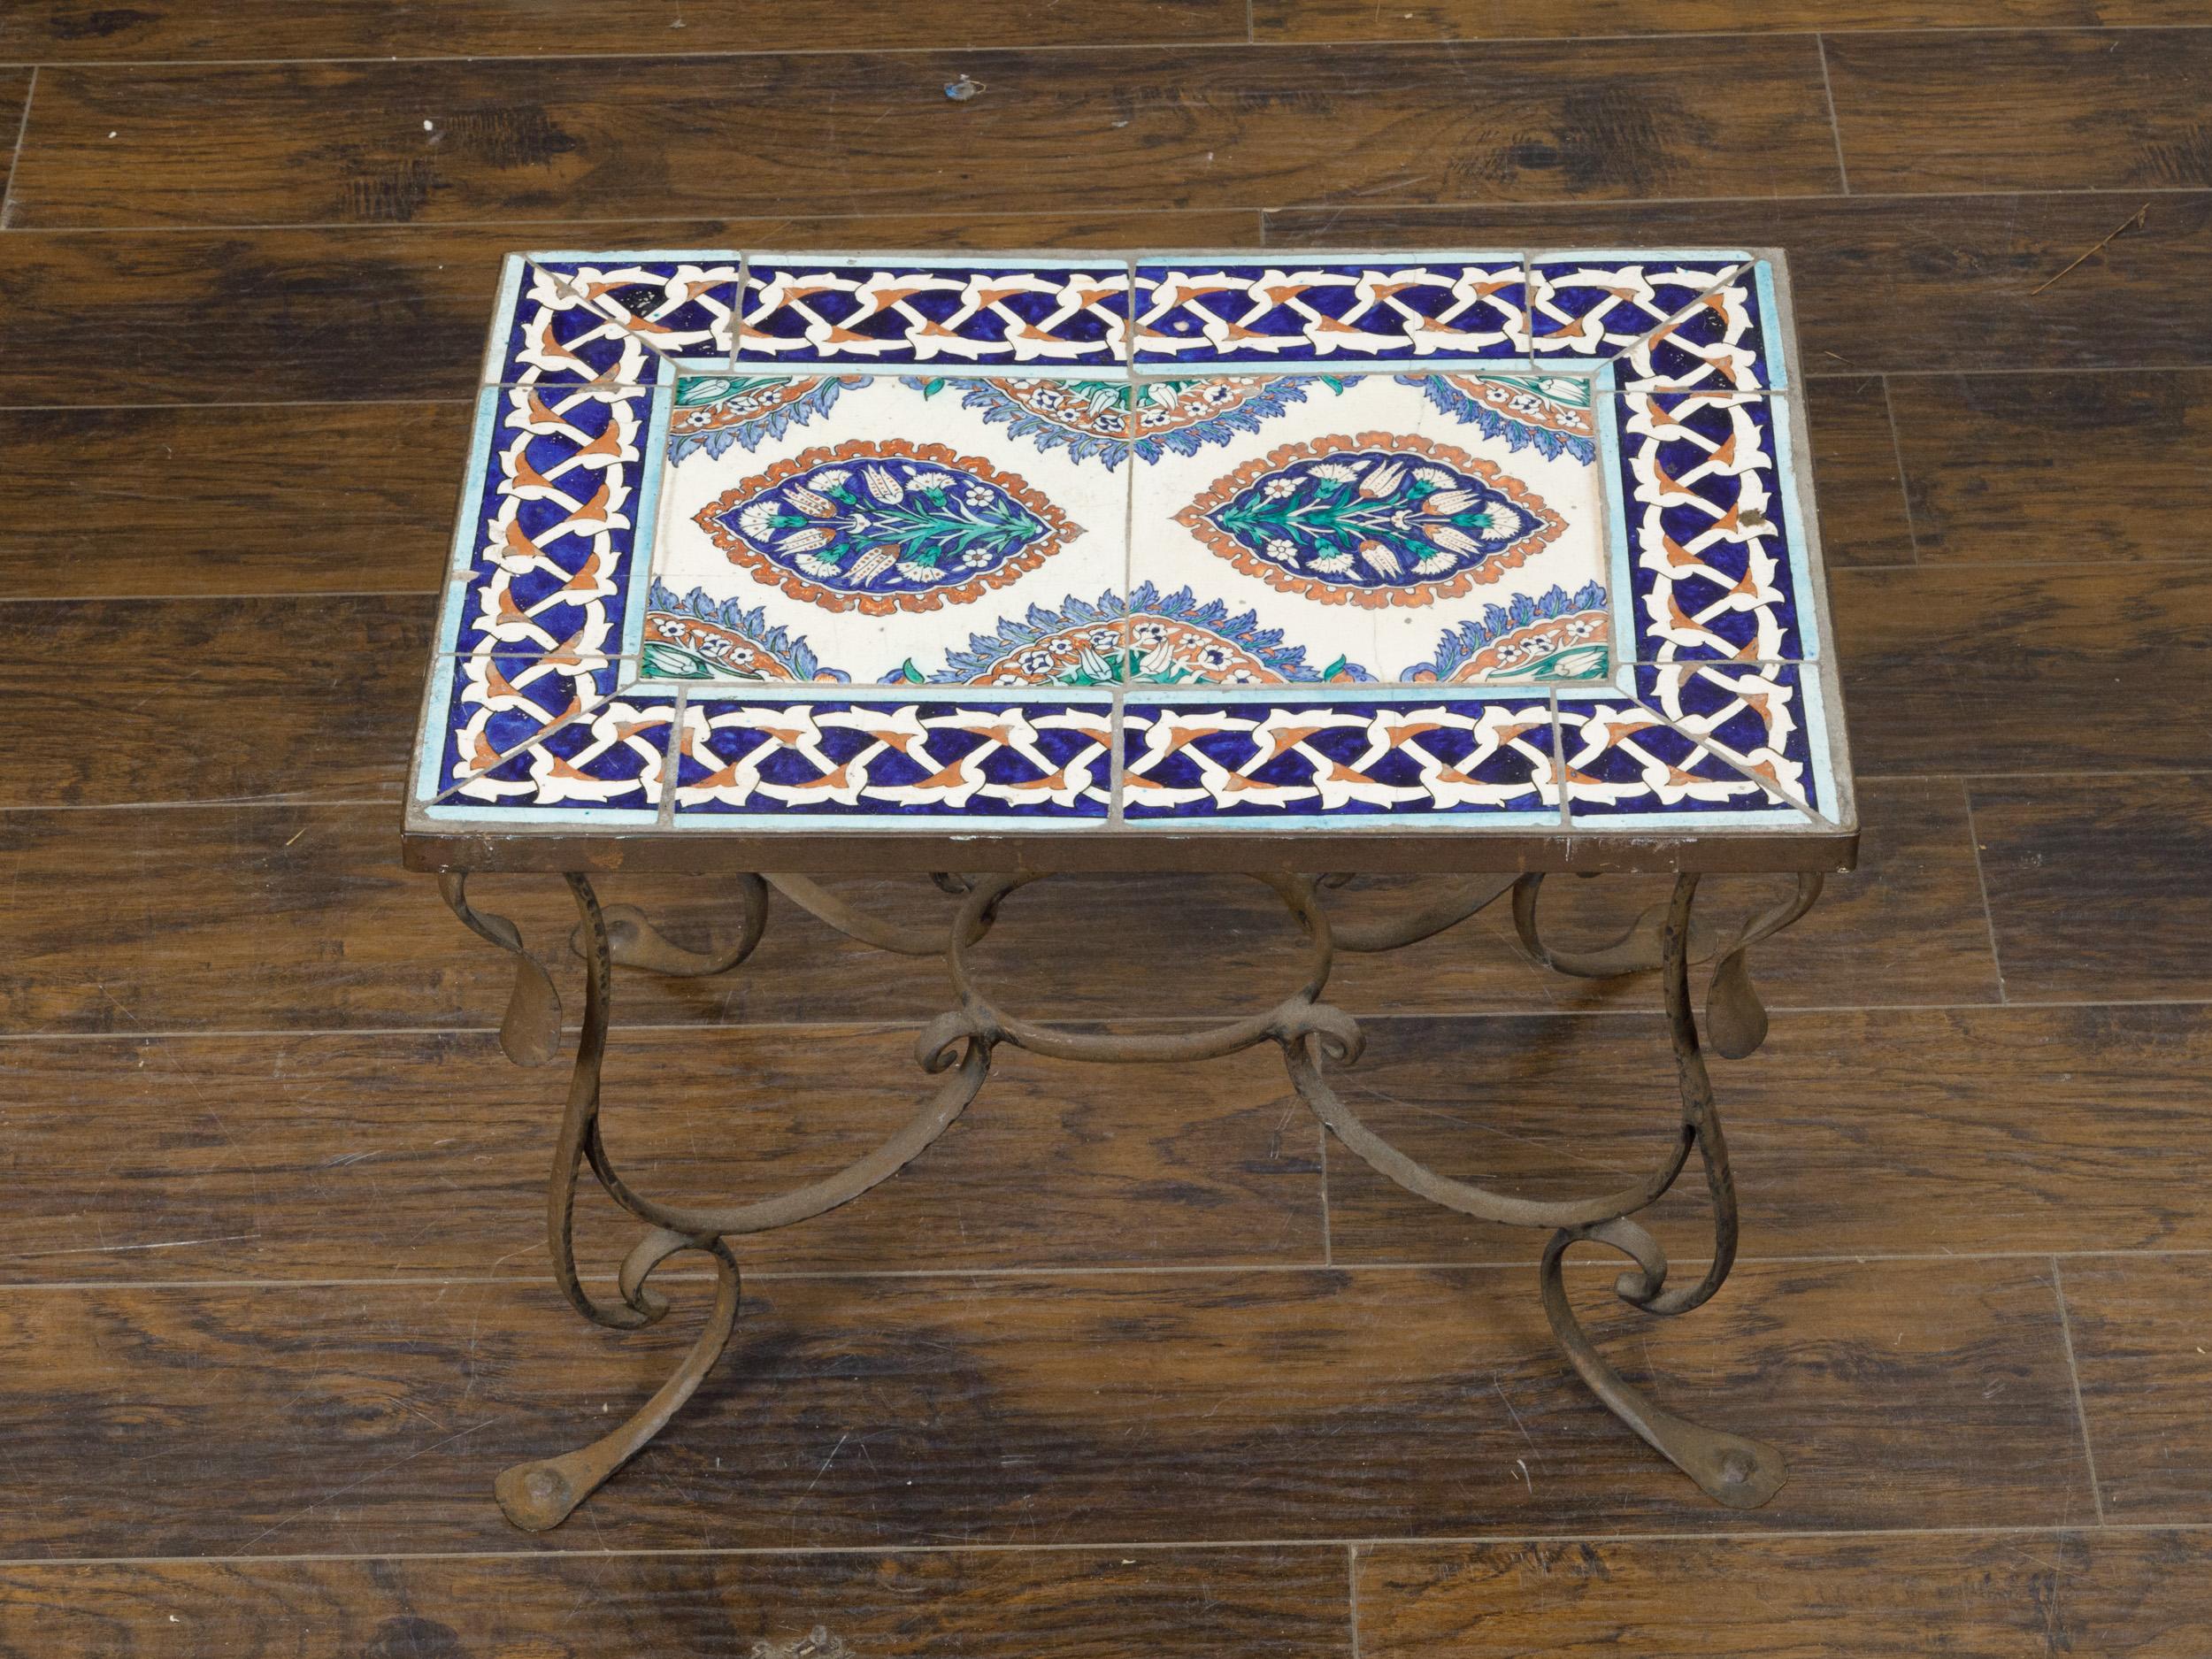 Midcentury Italian Wrought-Iron Coffee Table with Tile Top and Scrolling Base For Sale 2